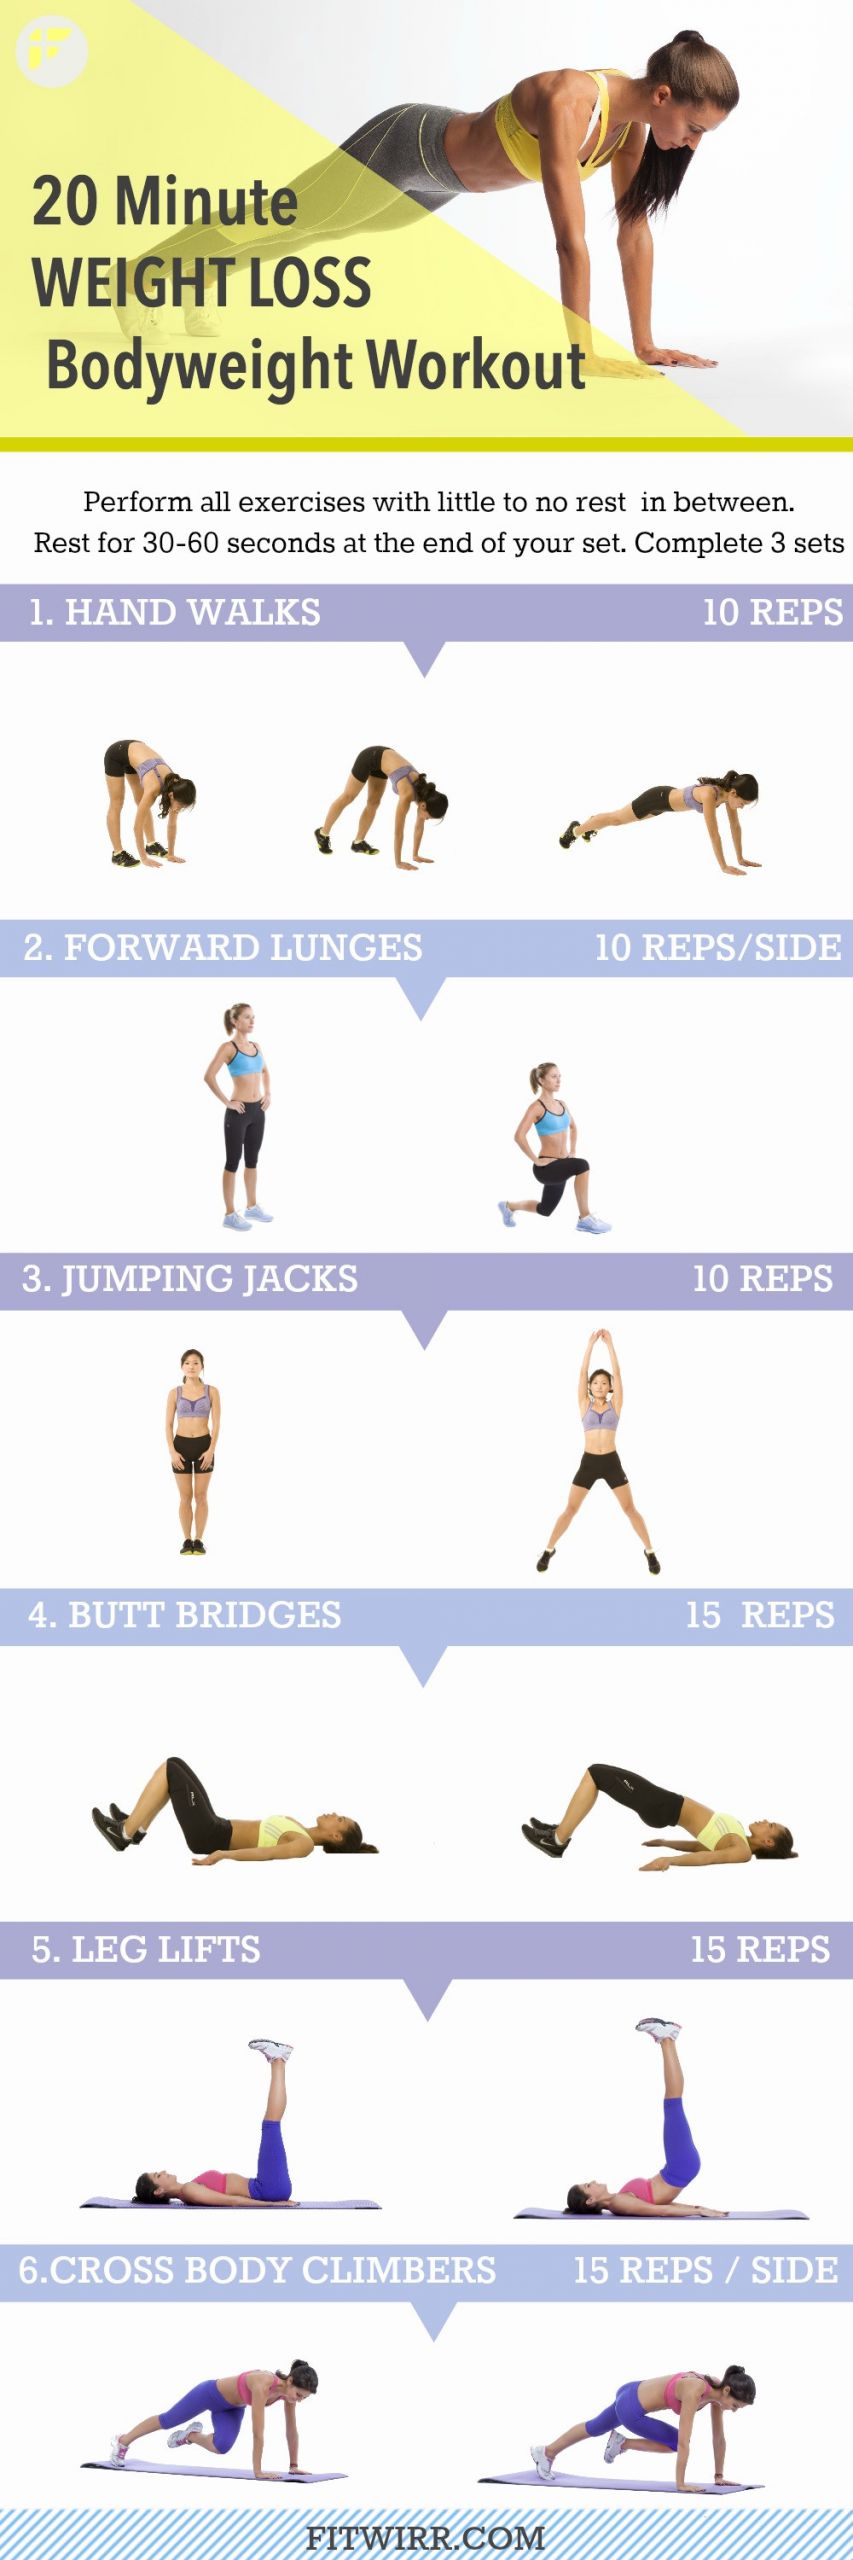 Weight Loss Exercises At Home Weightloss
 The Absolute Best Workout to Lose Weight Burn Fat and